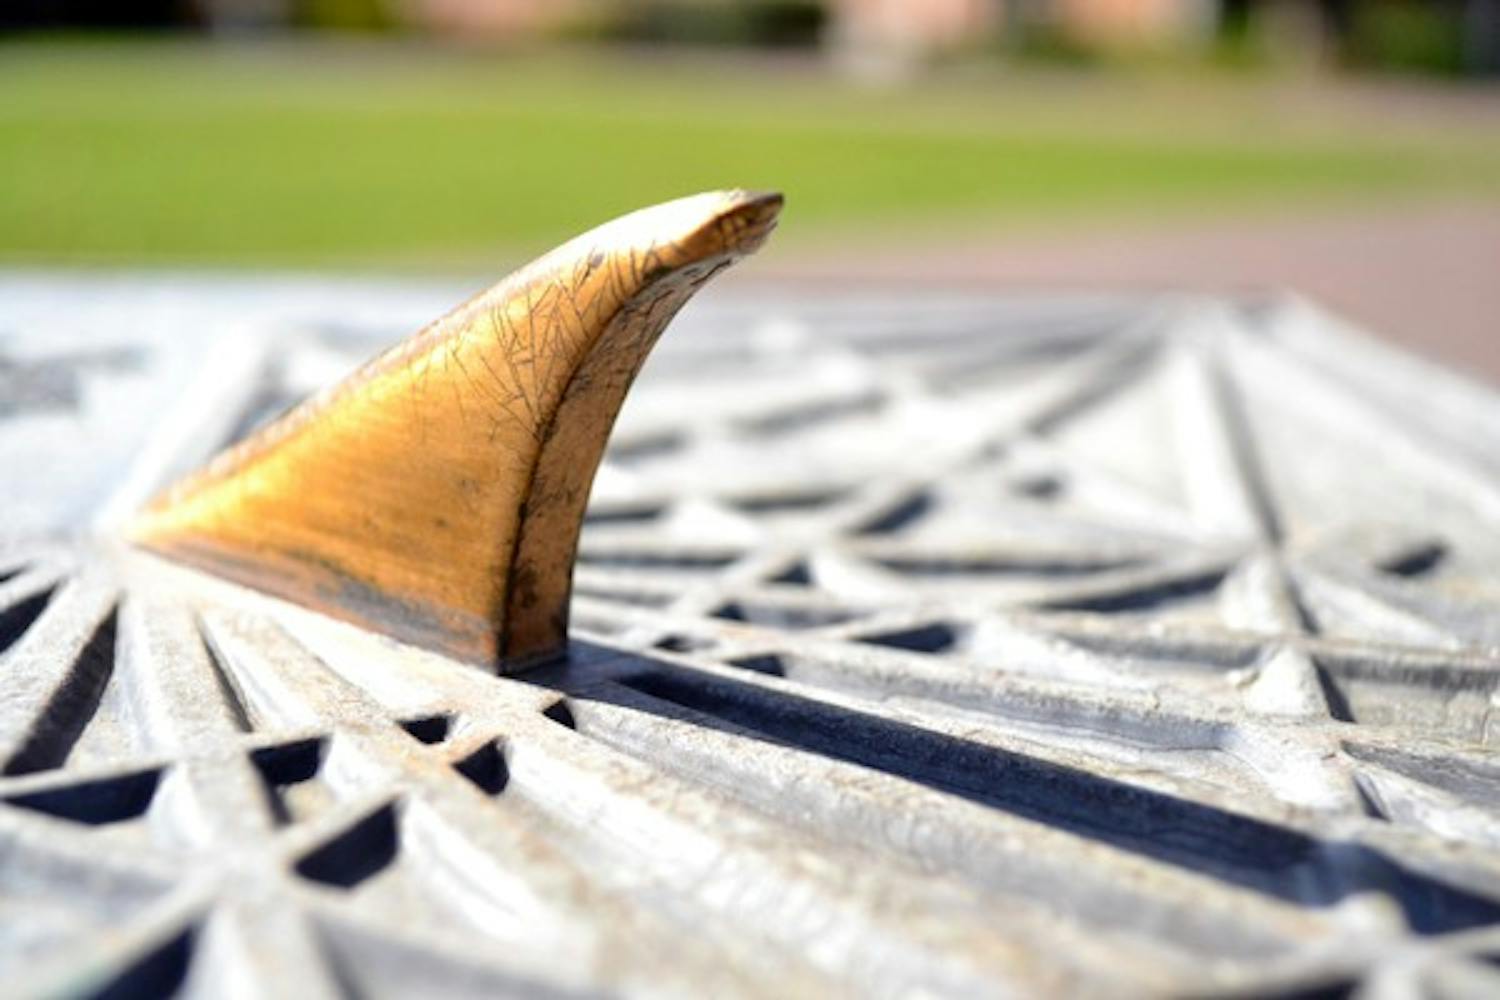 The sundial in front of Old Main on the Tempe campus casts a shadow on Feb. 5. (Photo by Mackenzie McCreary)